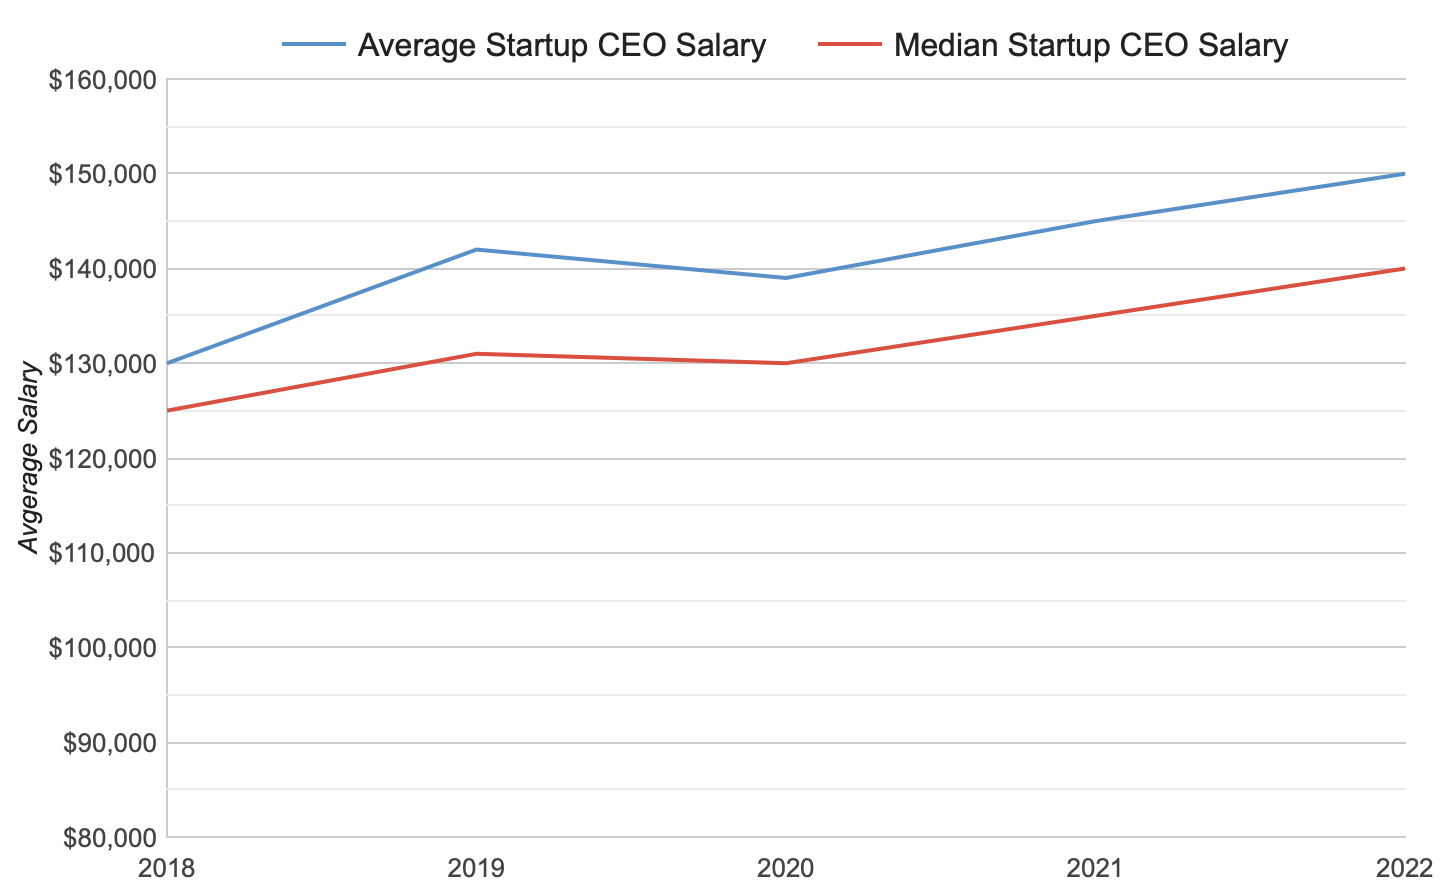 Average Startup CEO Salary - 2018 to 2022